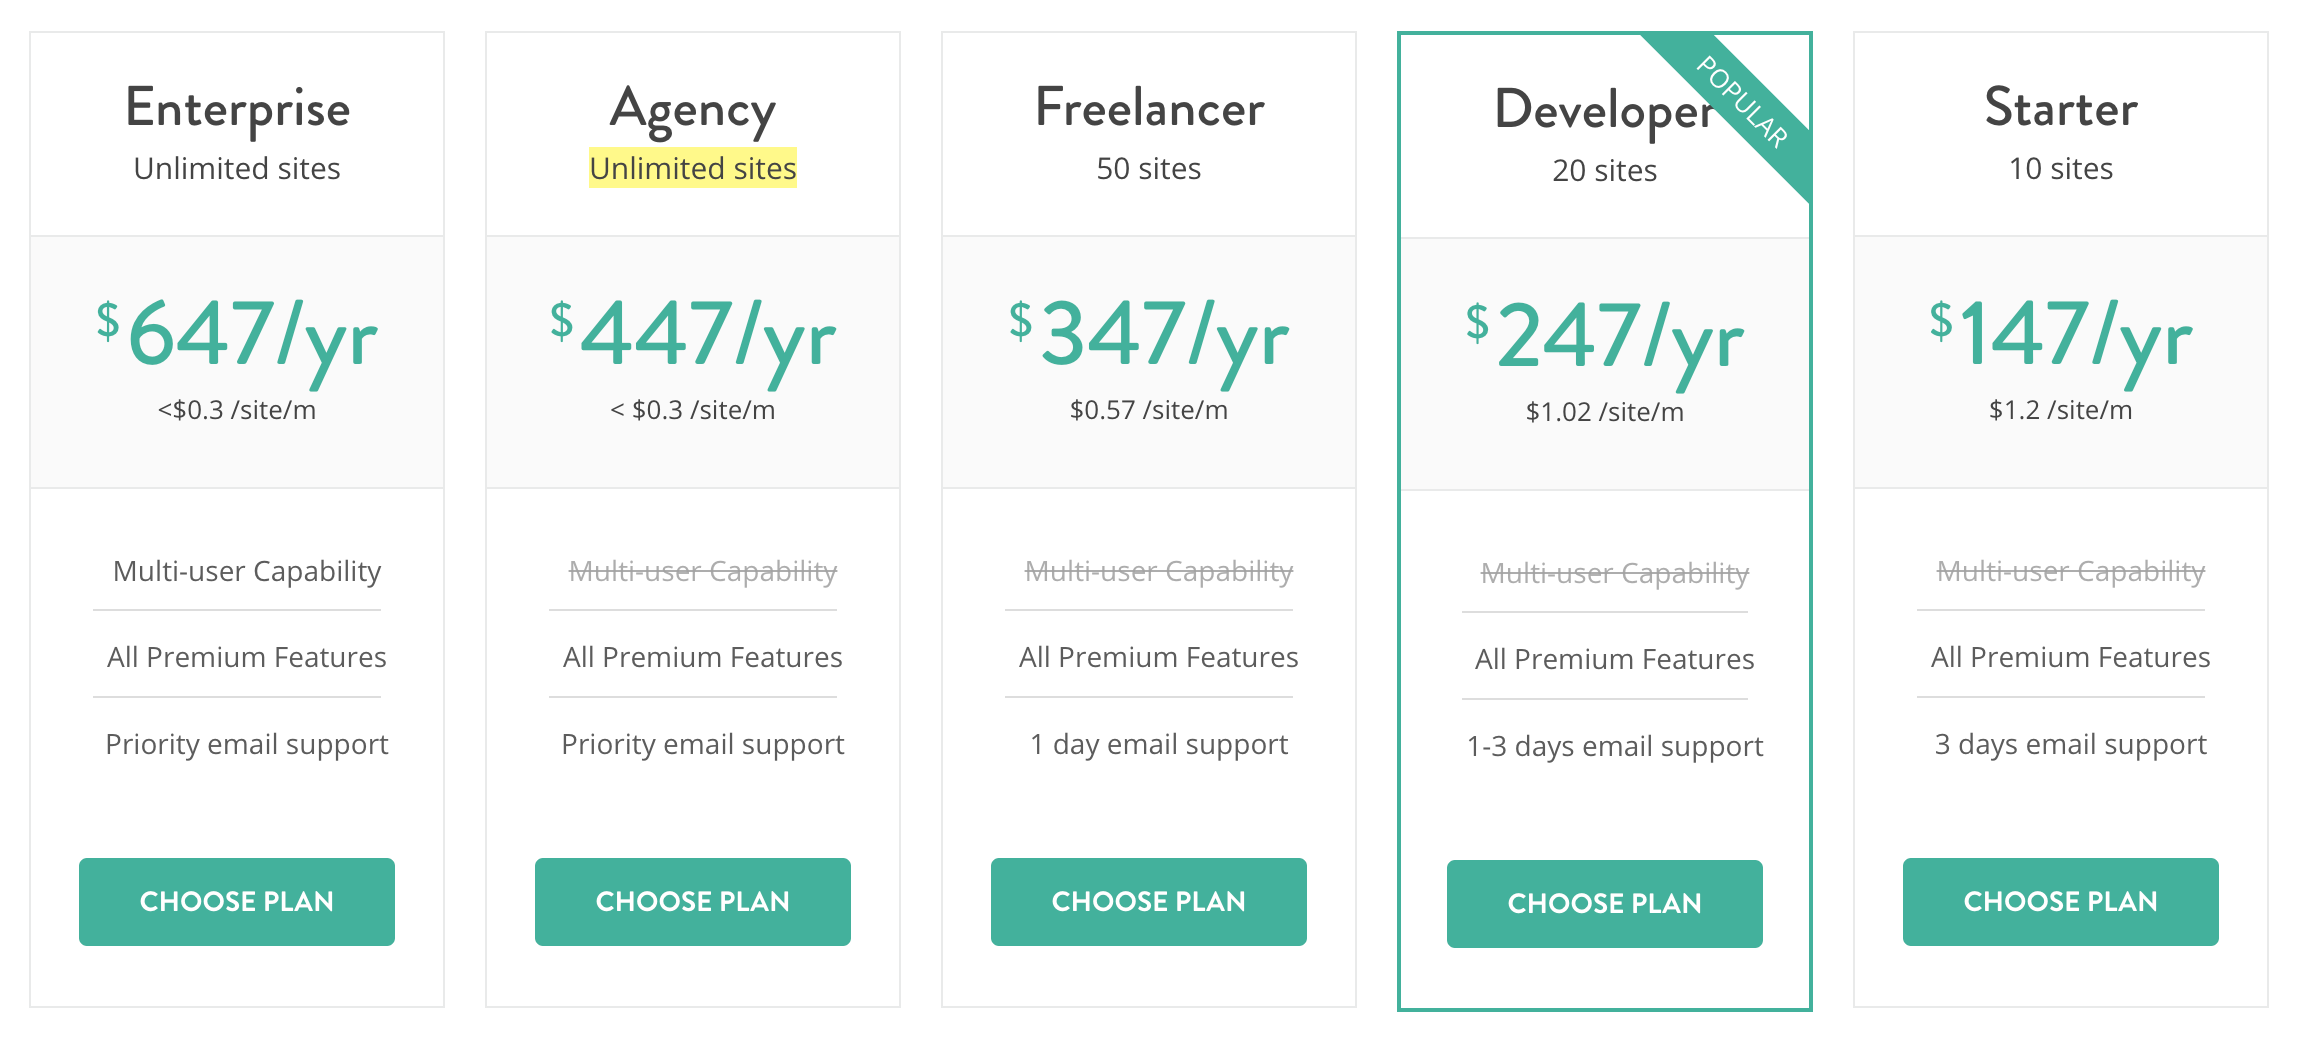 The pricing of one of the best WordPress management tool, InfiniteWP. With the Agency plan you can install it to unlimited WordPress sites.